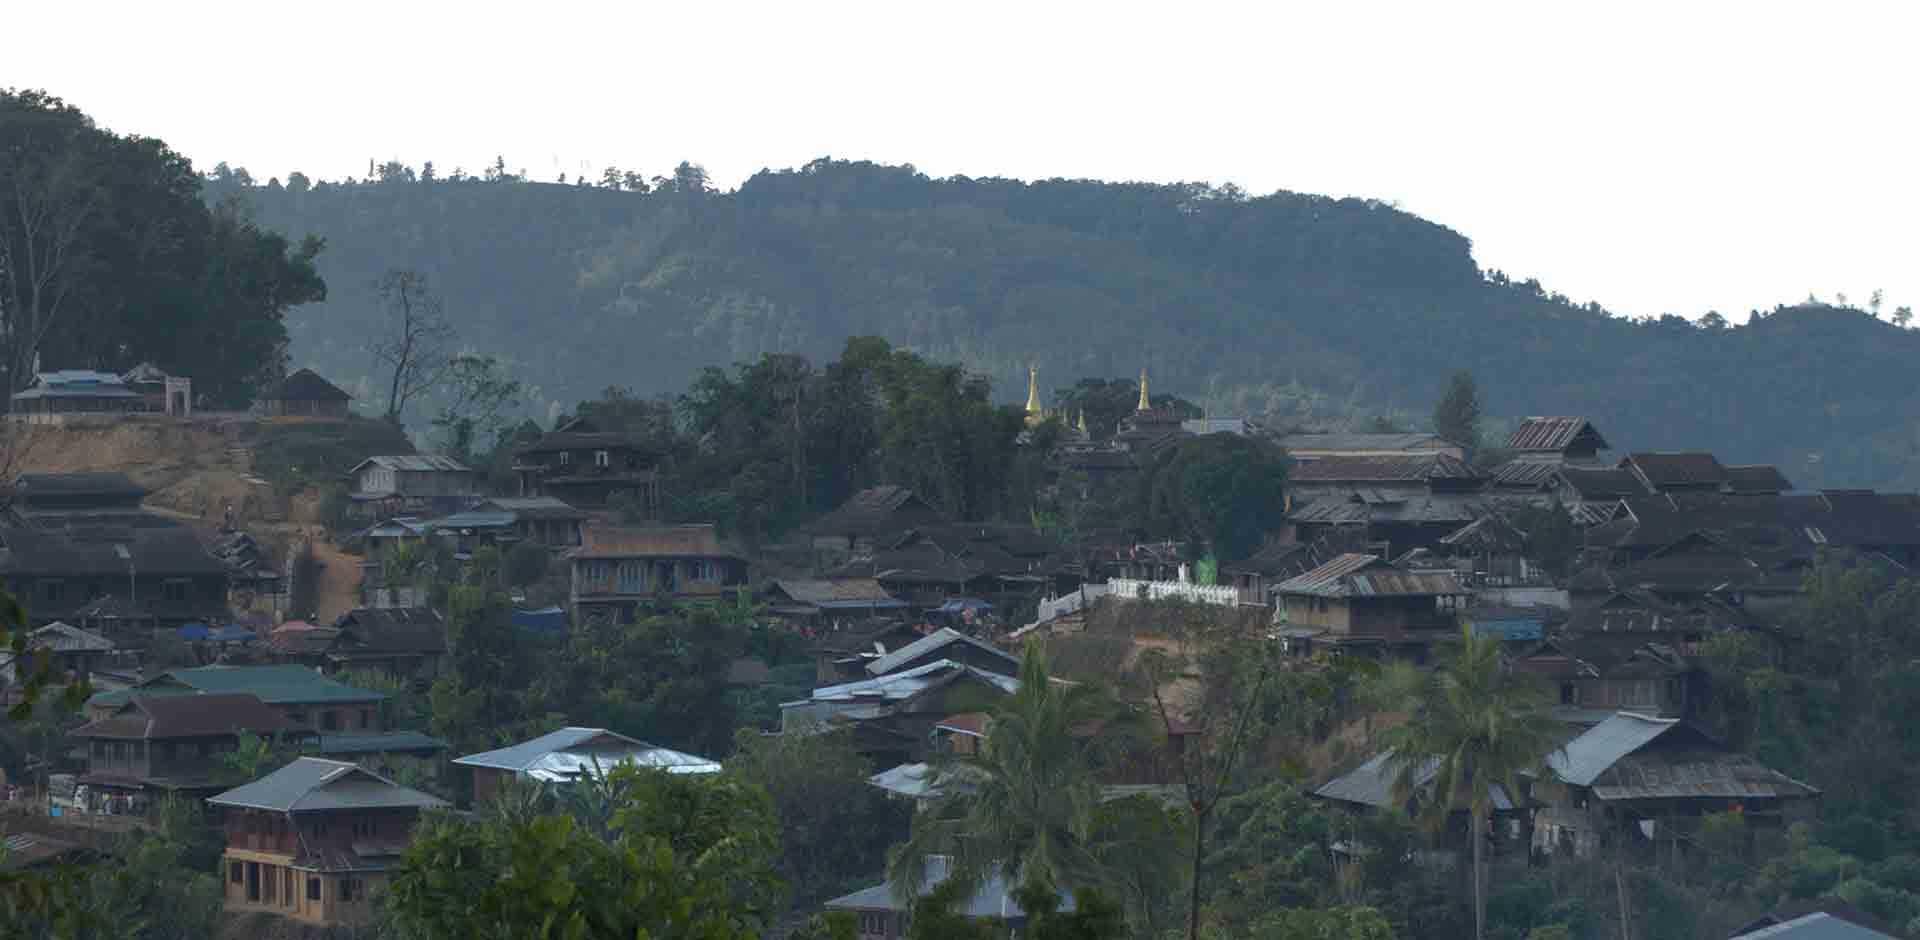 Hsipaw